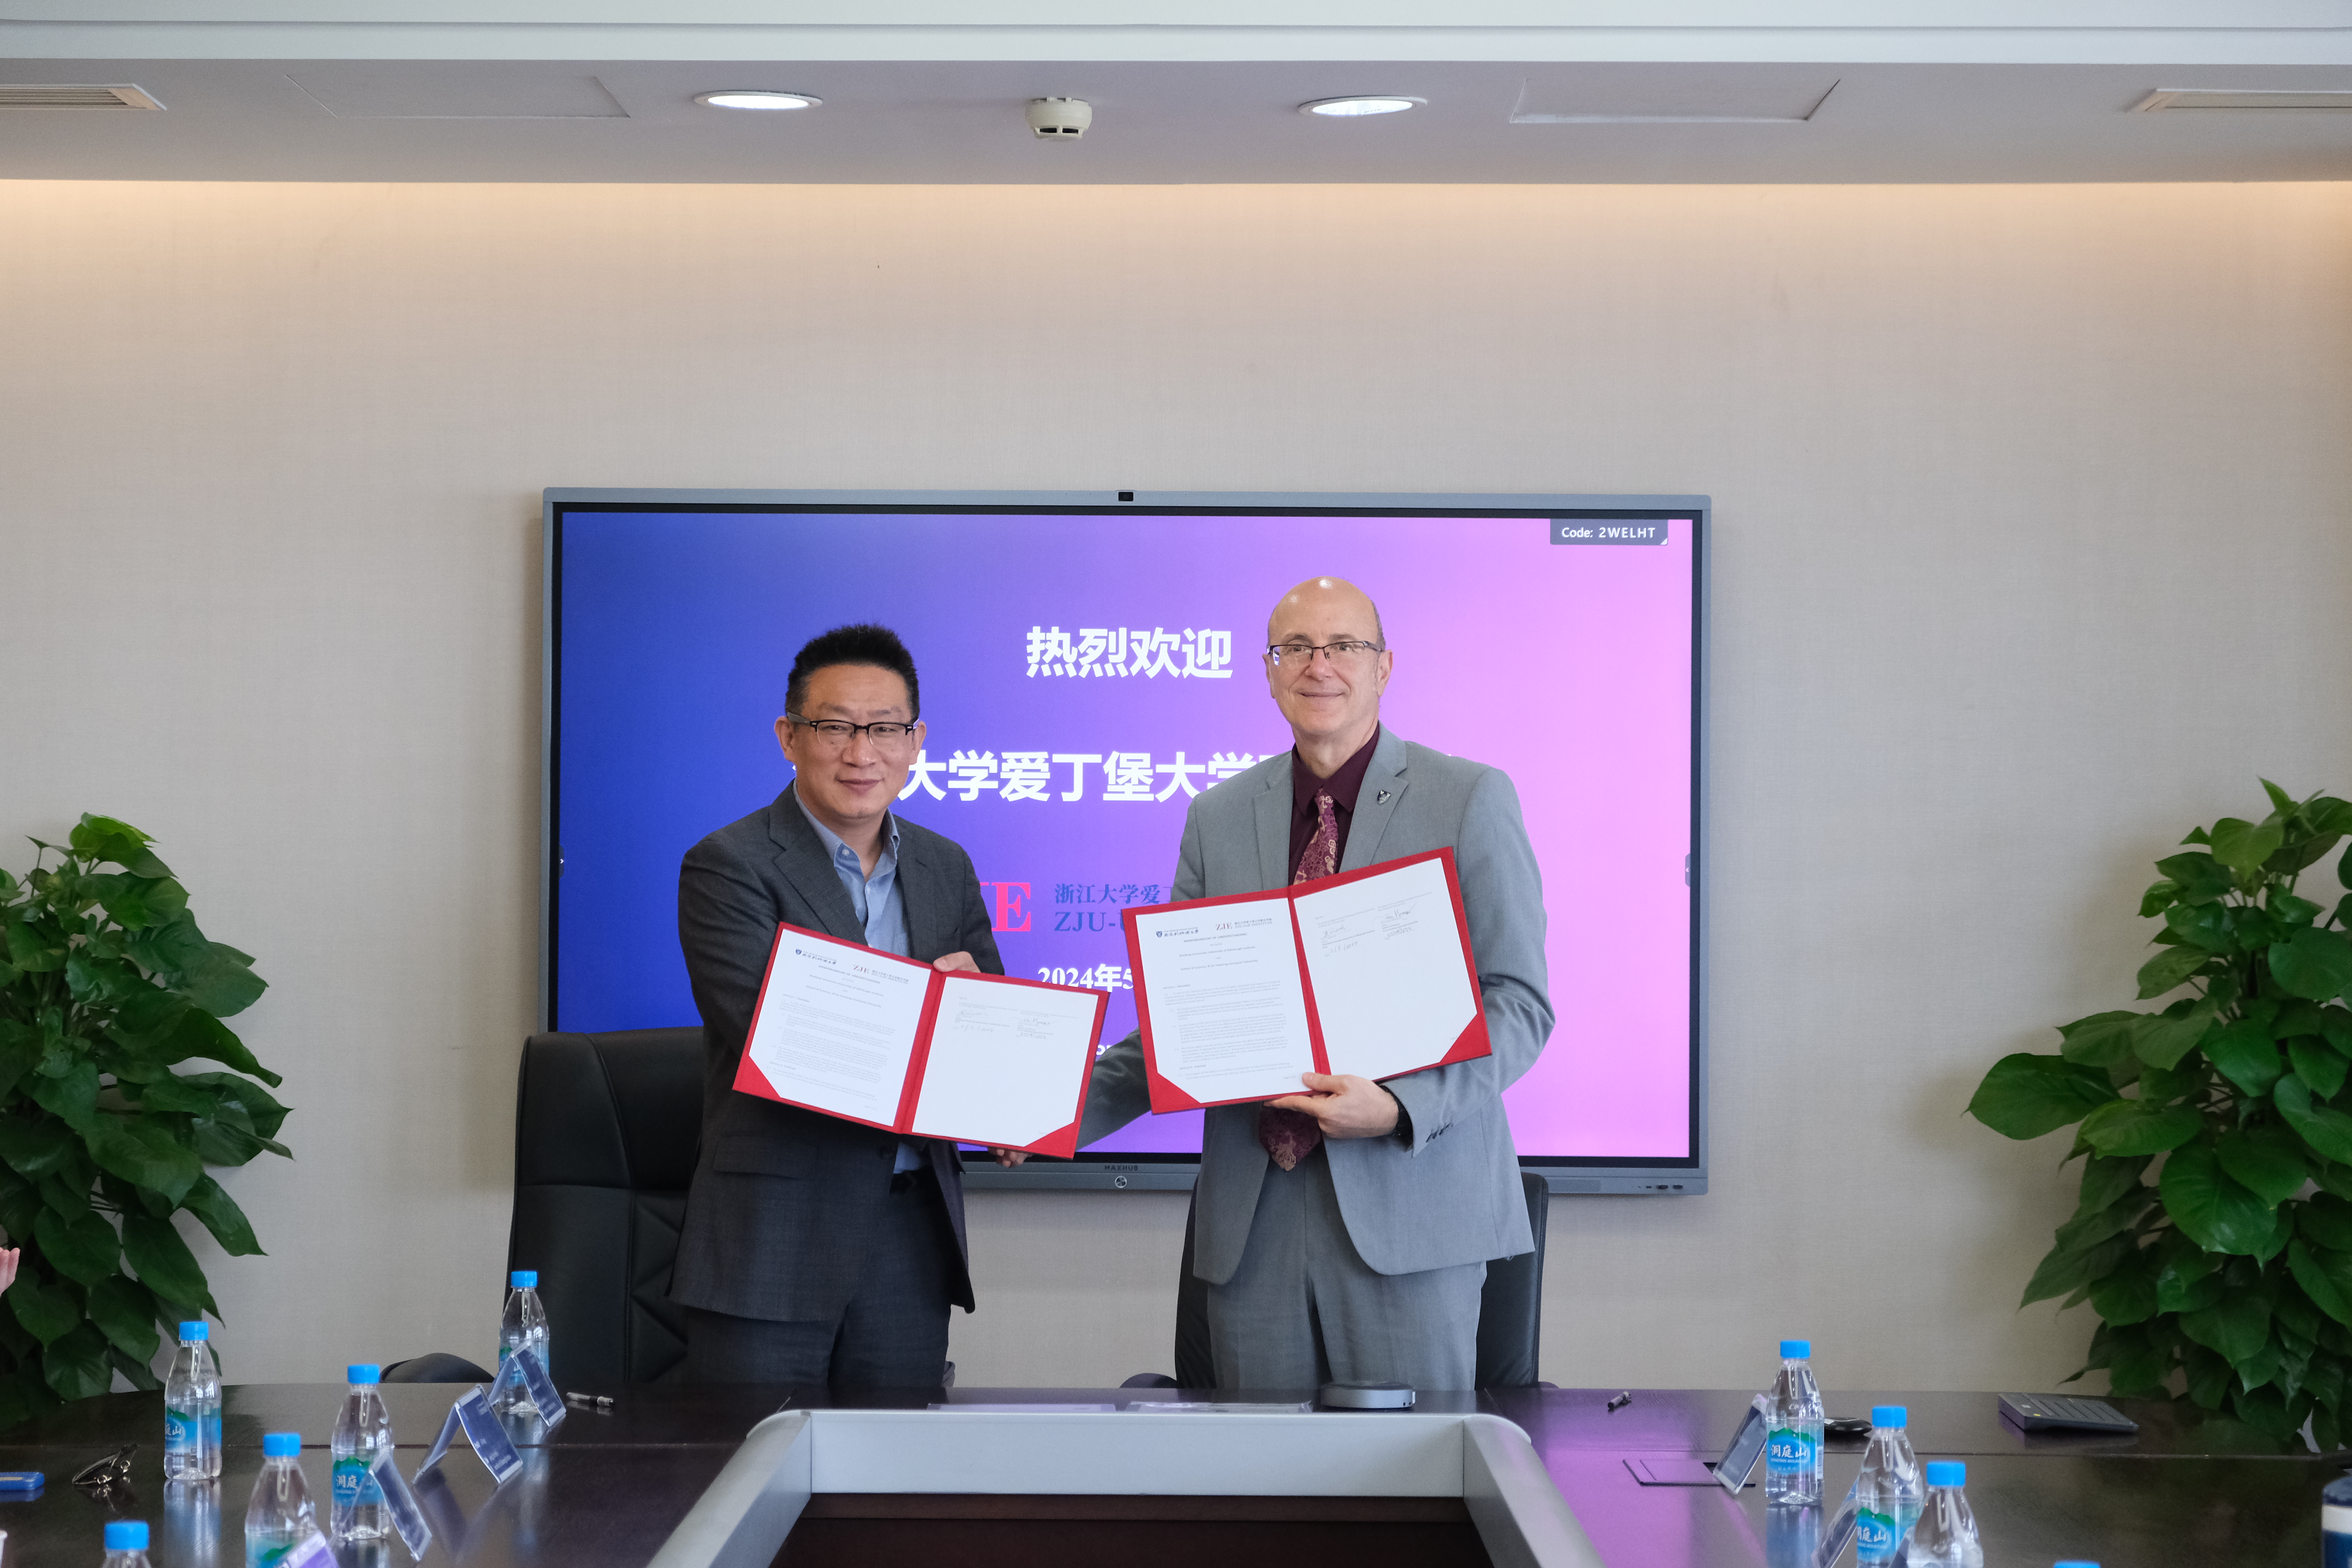 Deepening cooperation, jointly promoting development—Zhejiang University-University of Edinburgh Institute and Xi'an Jiaotong-Liverpool University Faculty of Science successfully held a bilateral academic exchange event